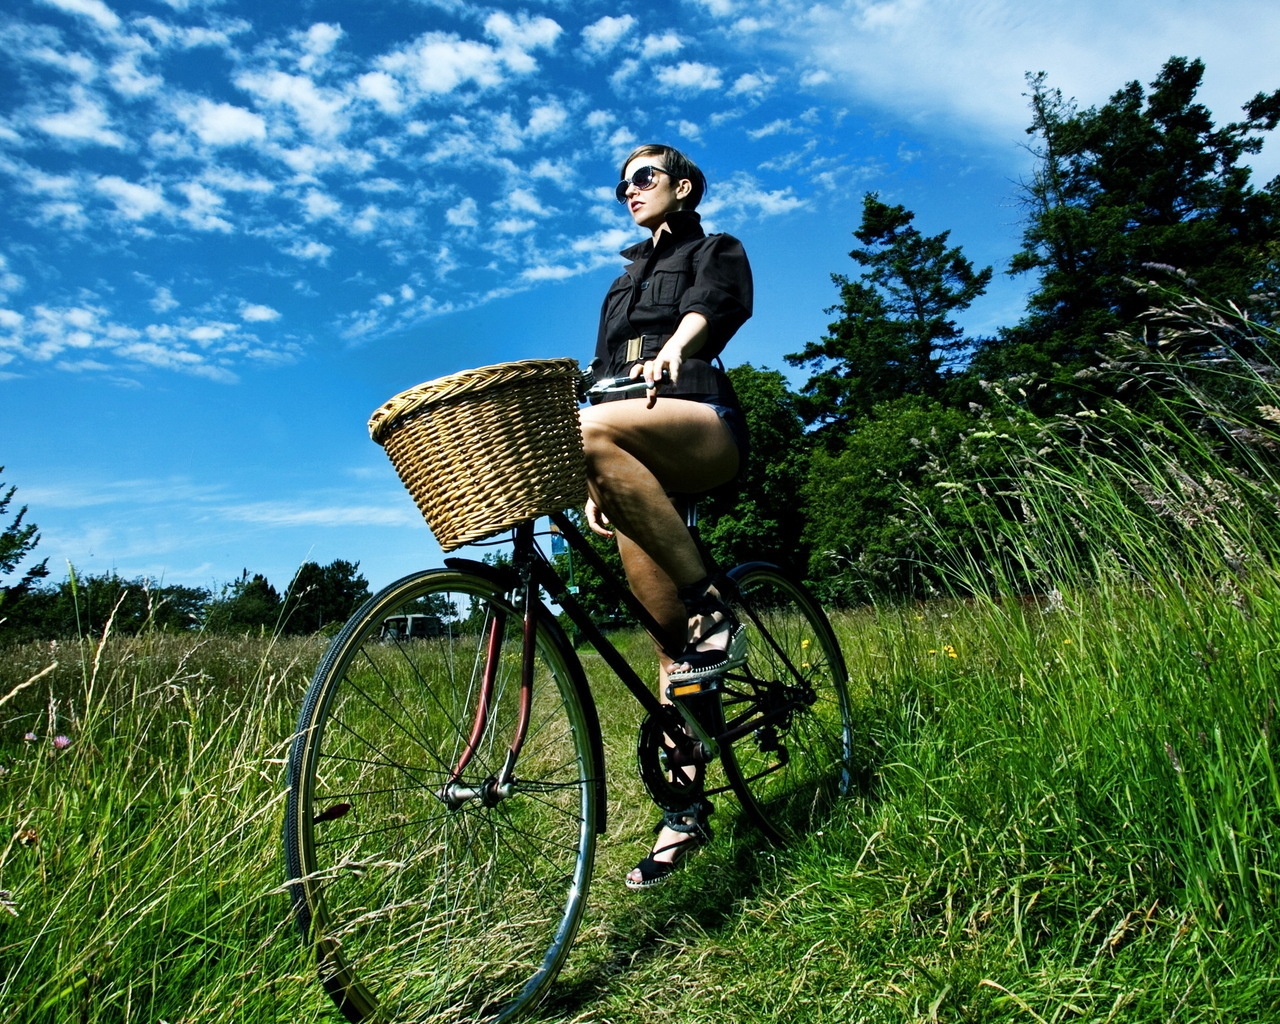 Cool Lady on Bike for 1280 x 1024 resolution